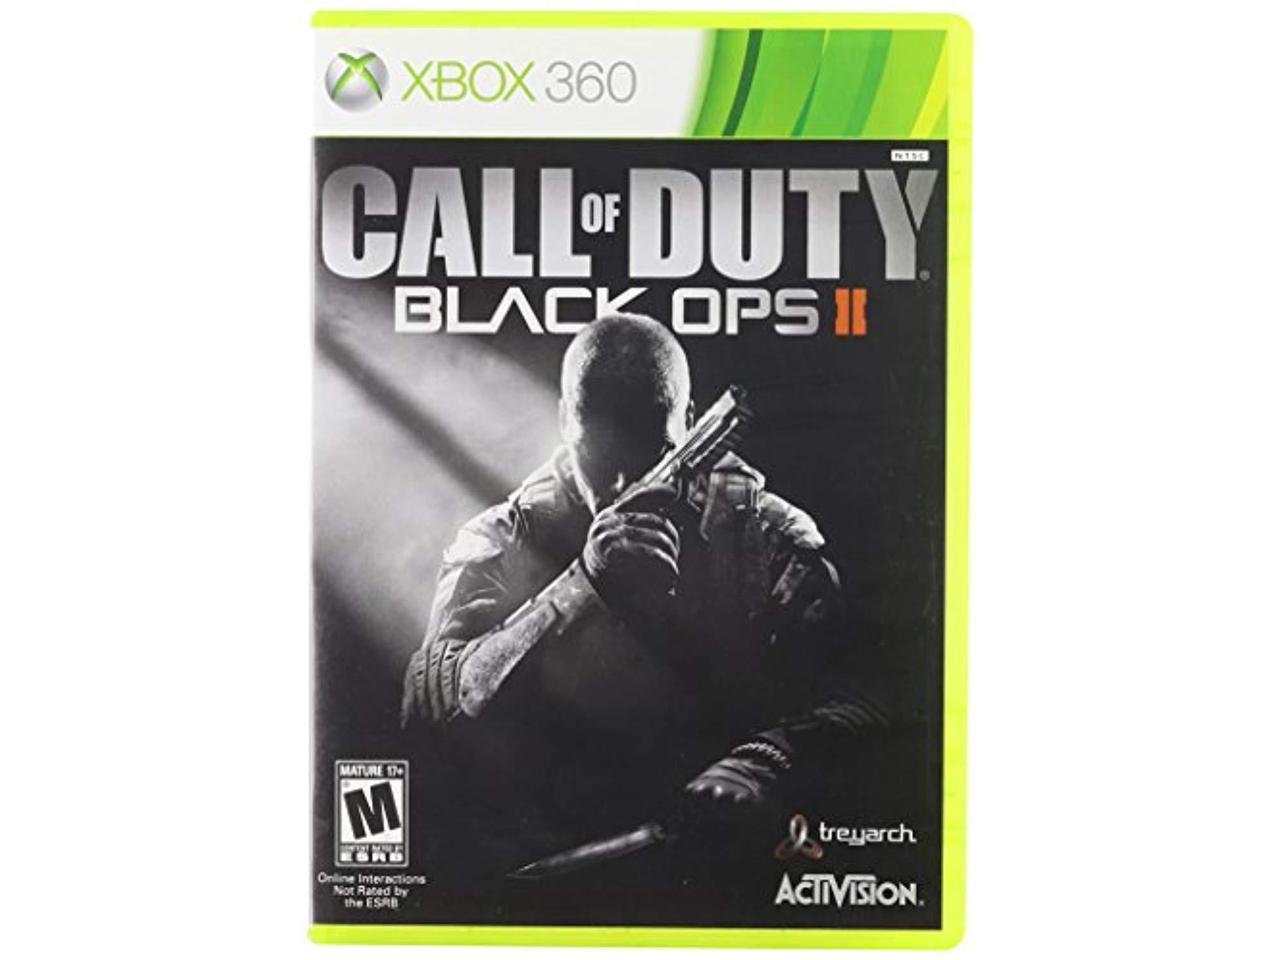 call of duty black ops collection xbox 360